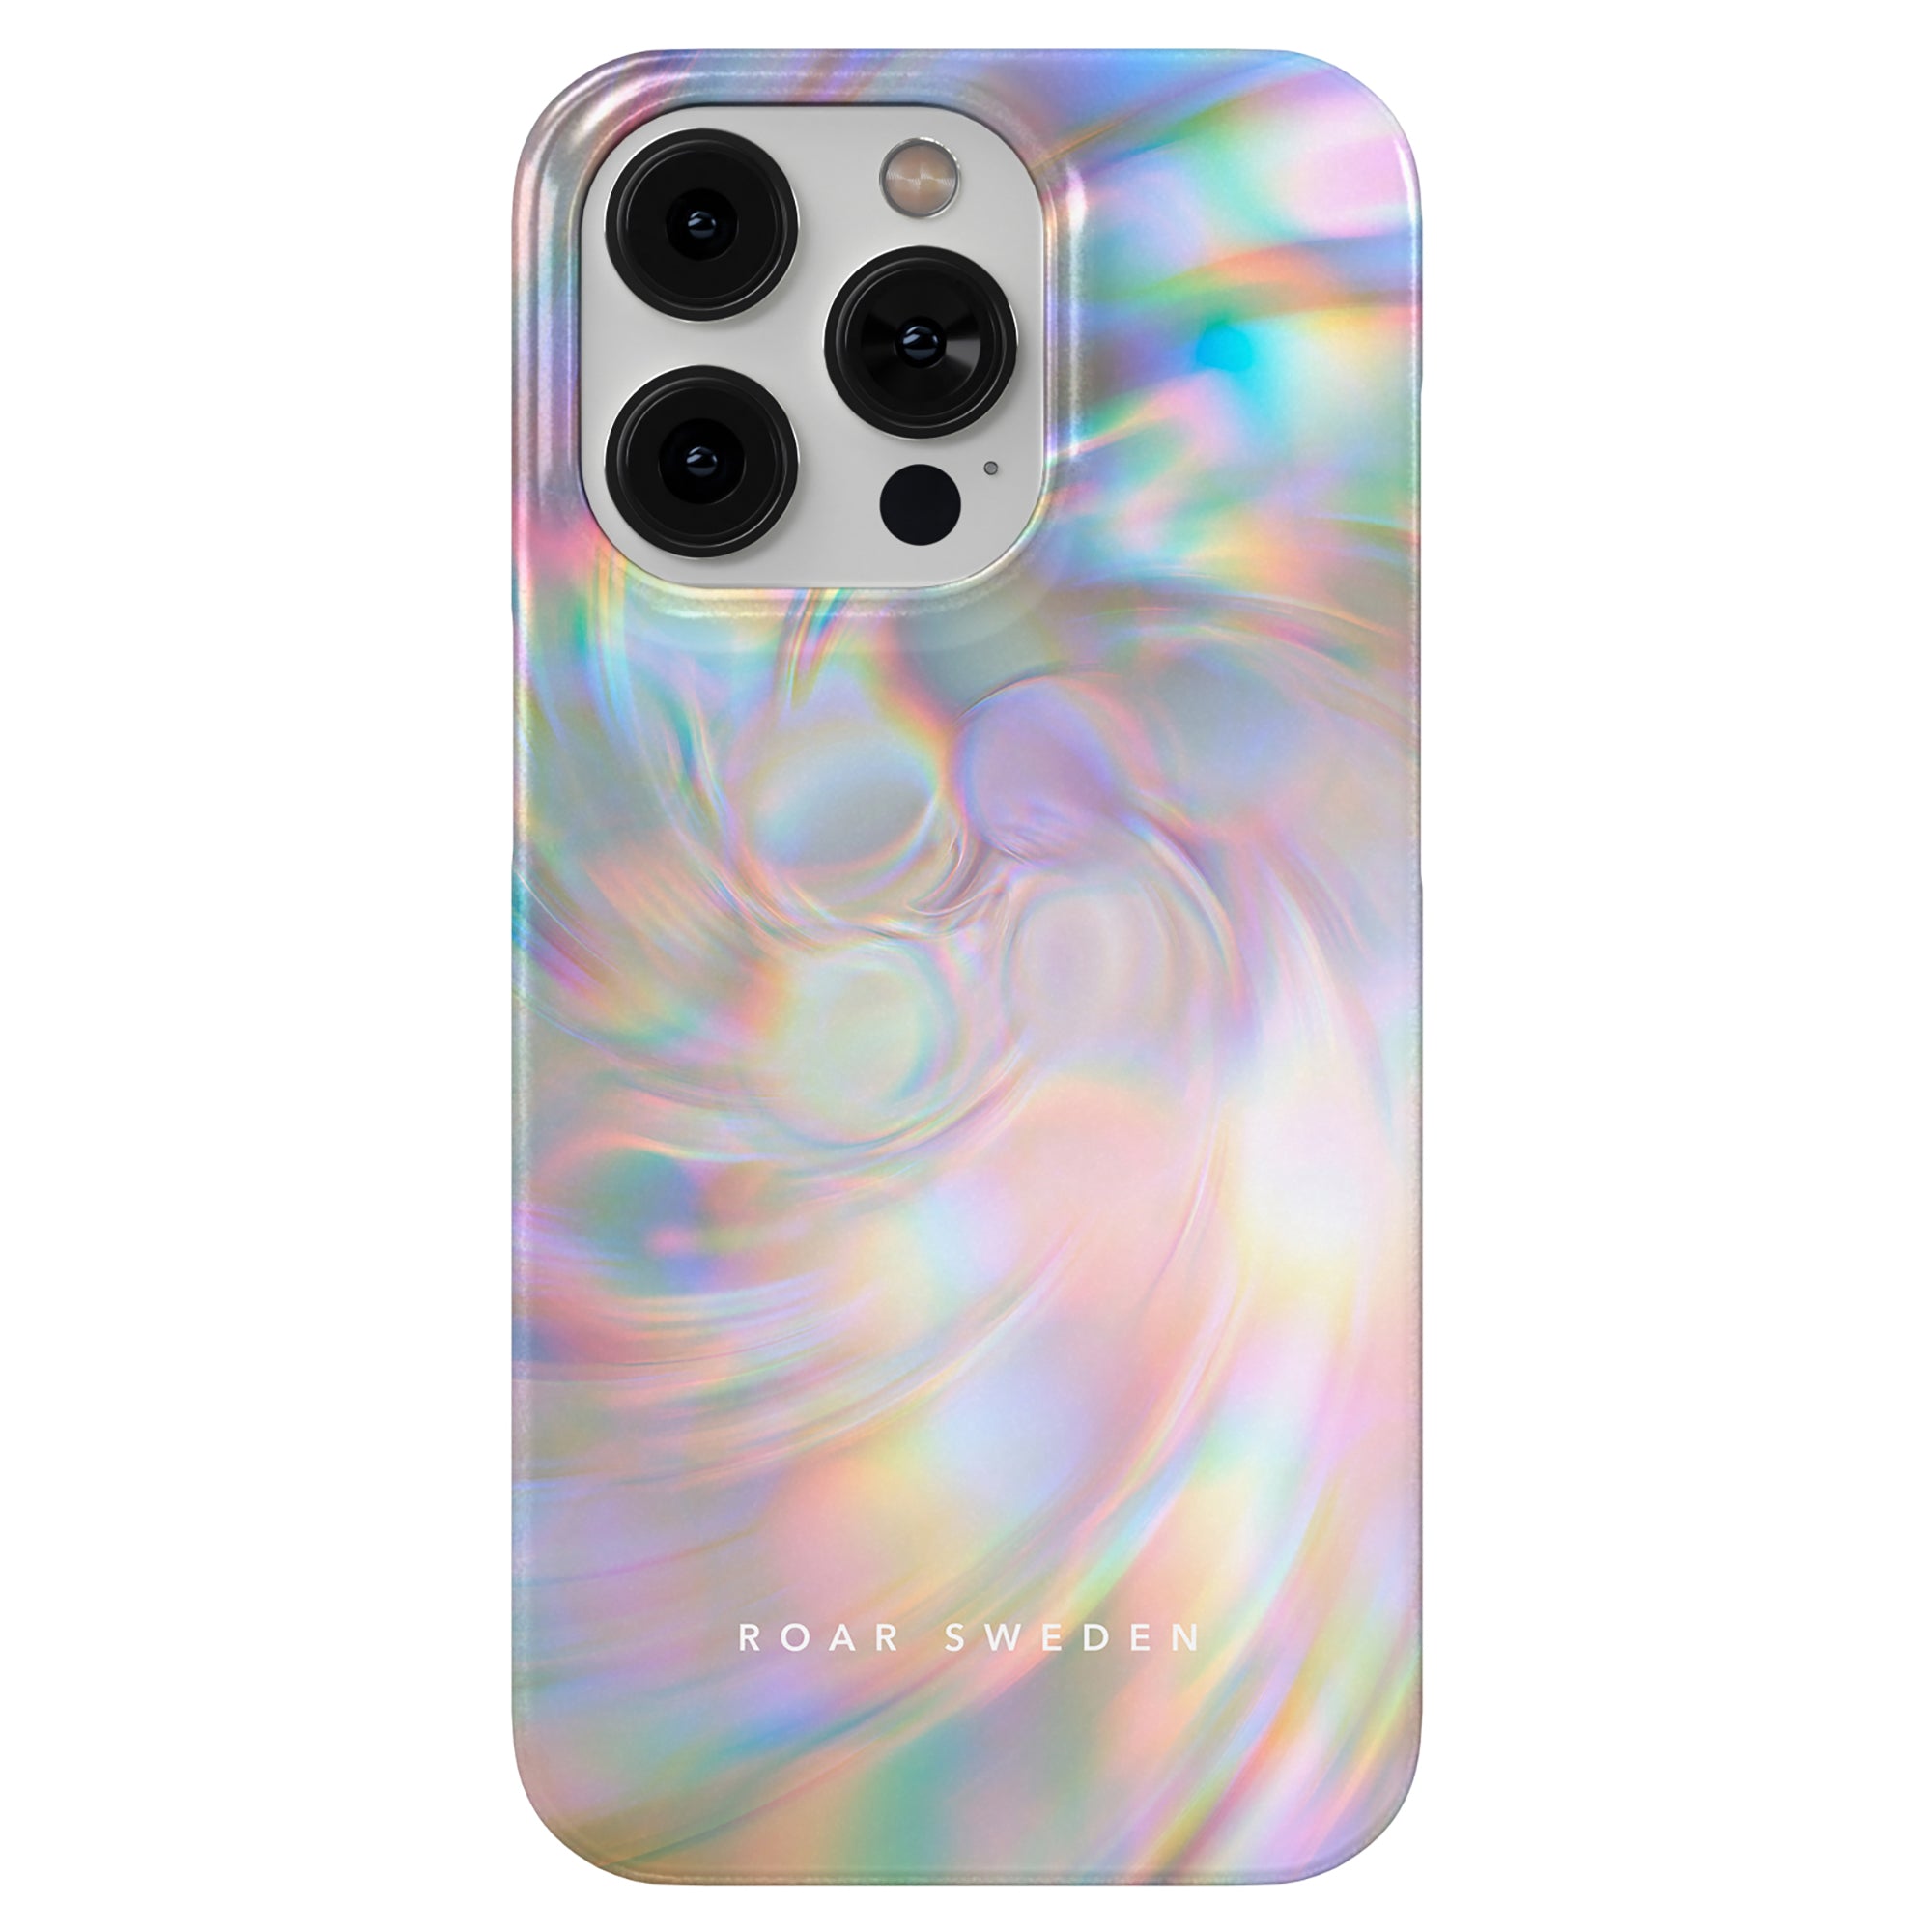 A smartphone with a Pearlescent - Slim case showing iridescent swirls and labeled "roar sweden," featuring three camera lenses.